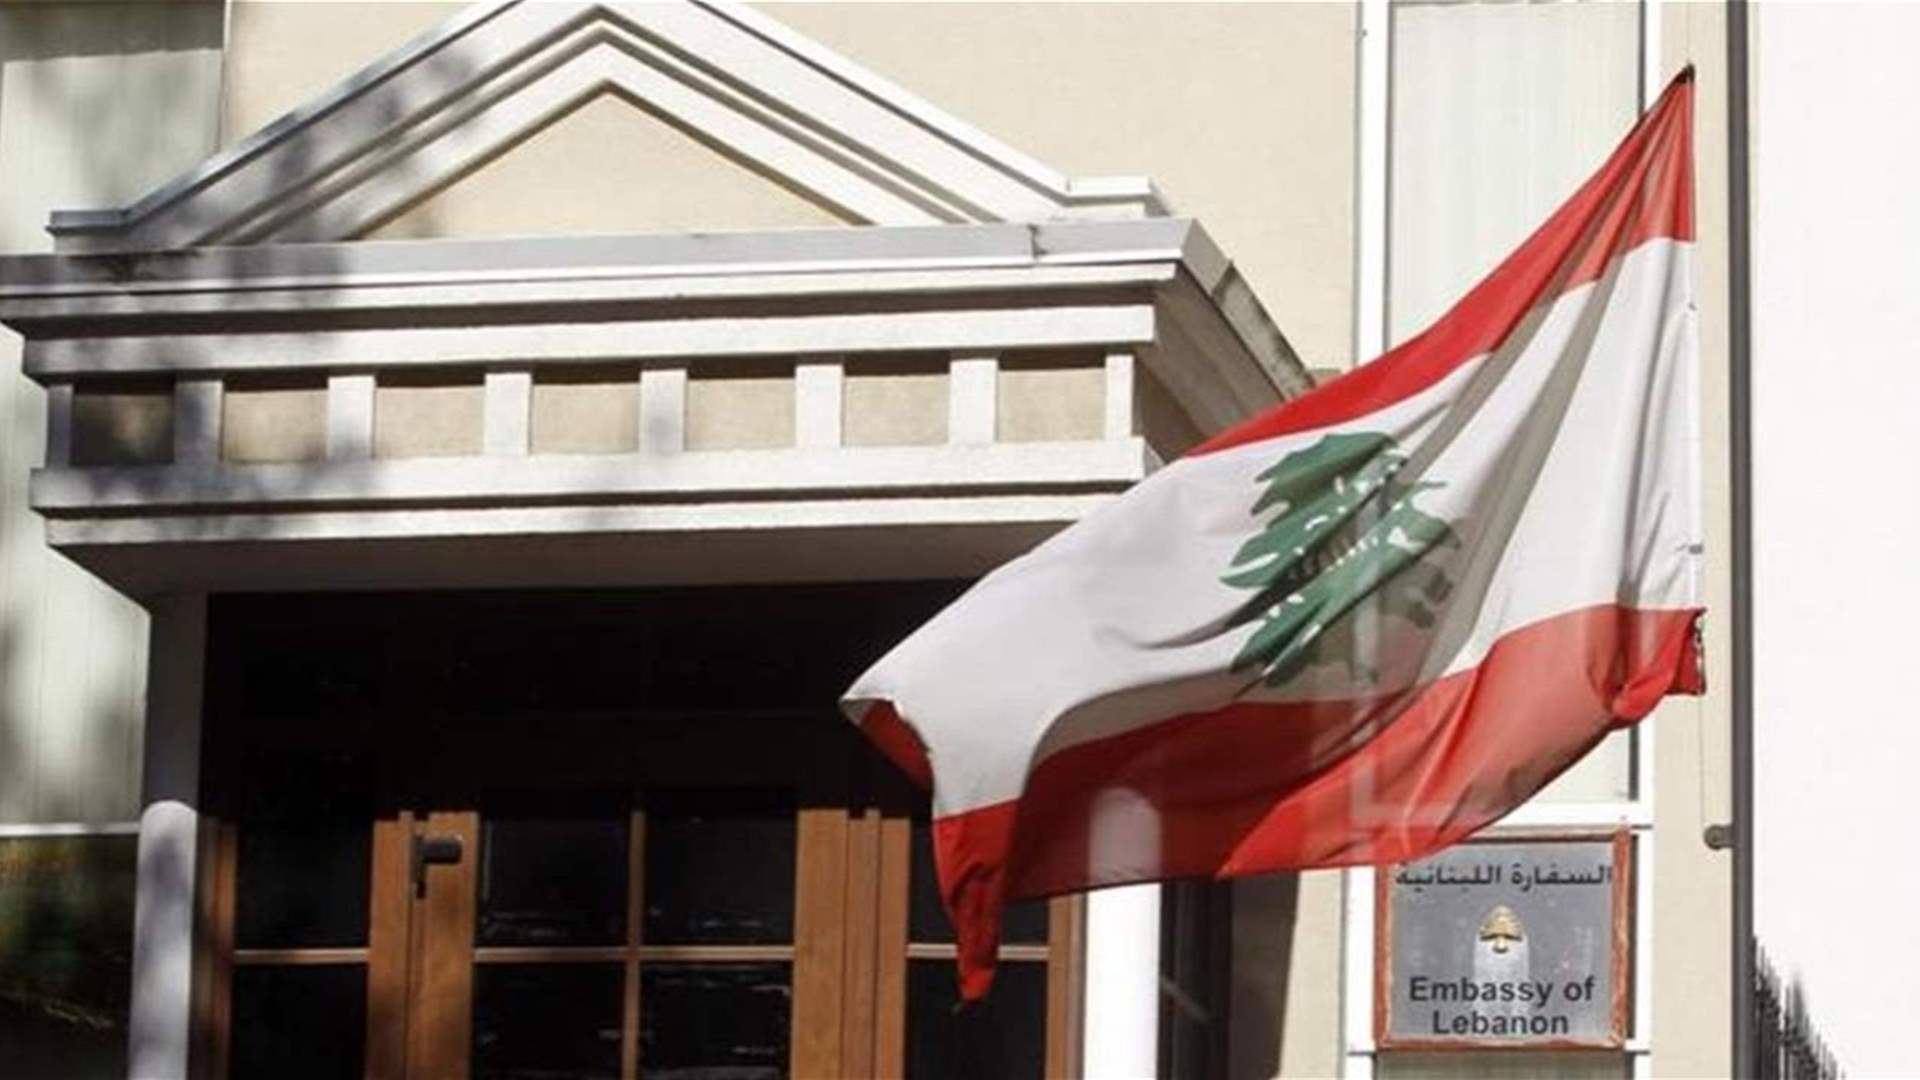 Unpaid wages taint Lebanon&#39;s reputation as the embassy closes in Ukraine